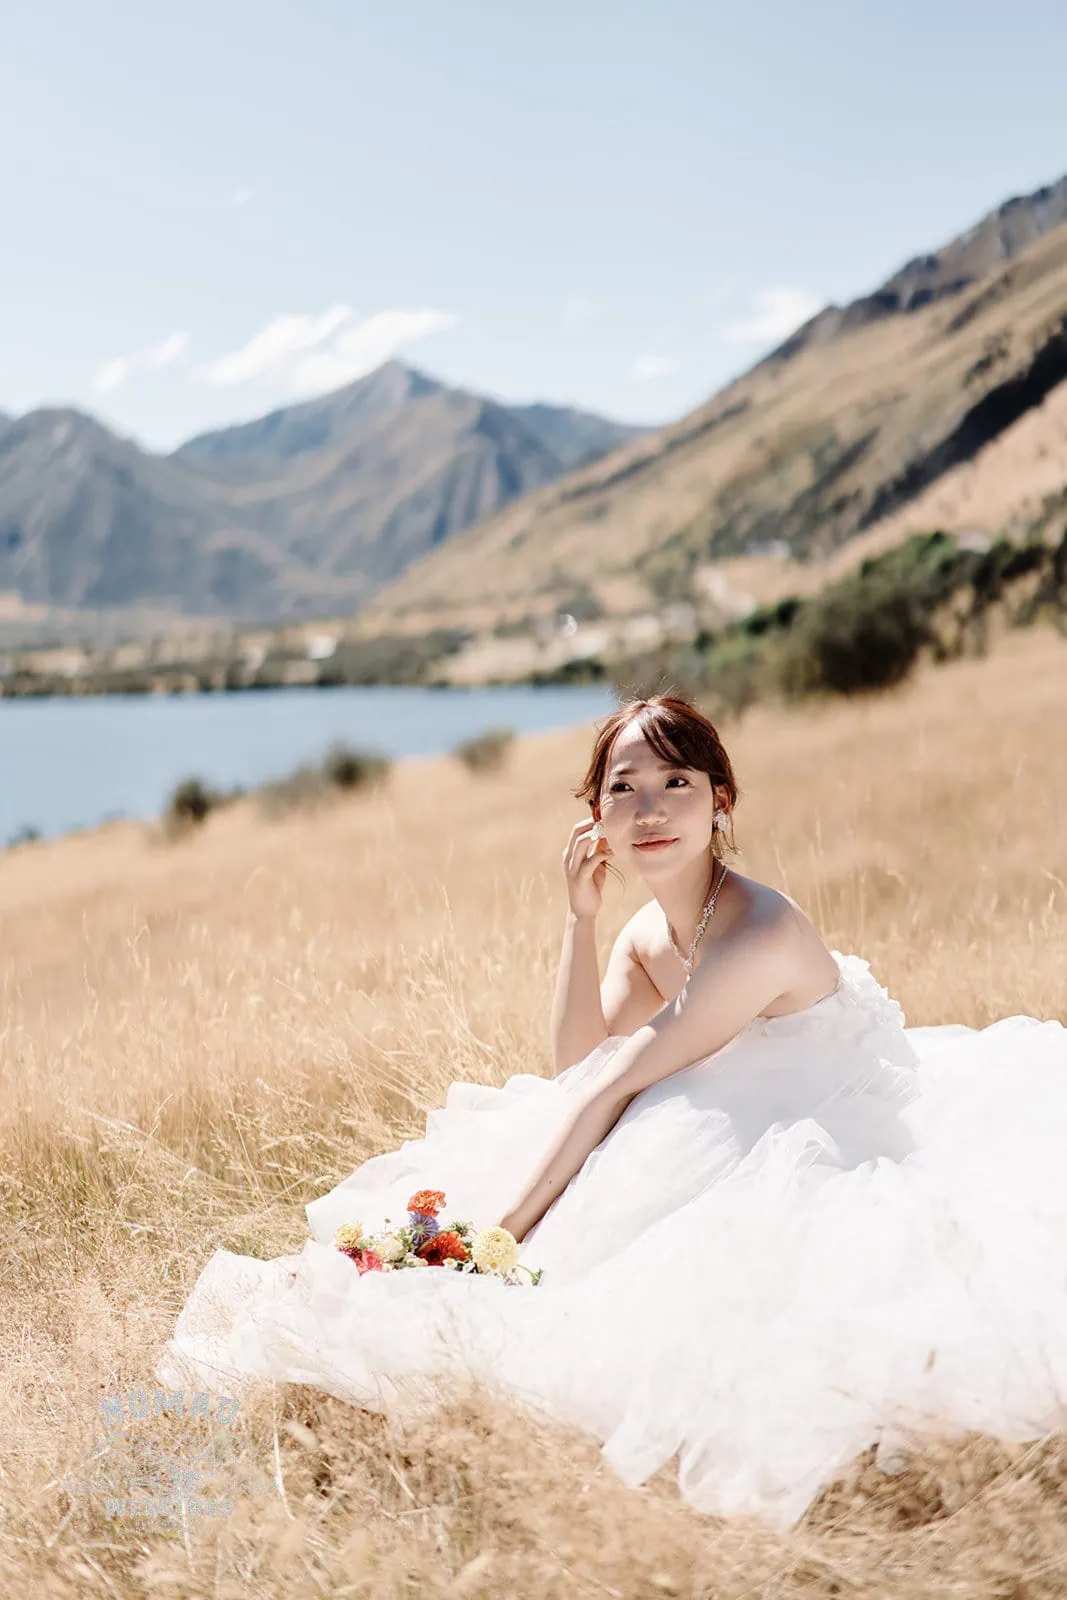 Queenstown New Zealand Elopement Wedding Photographer - A bride sitting in a field with mountains in the background - Queenstown summer edition.